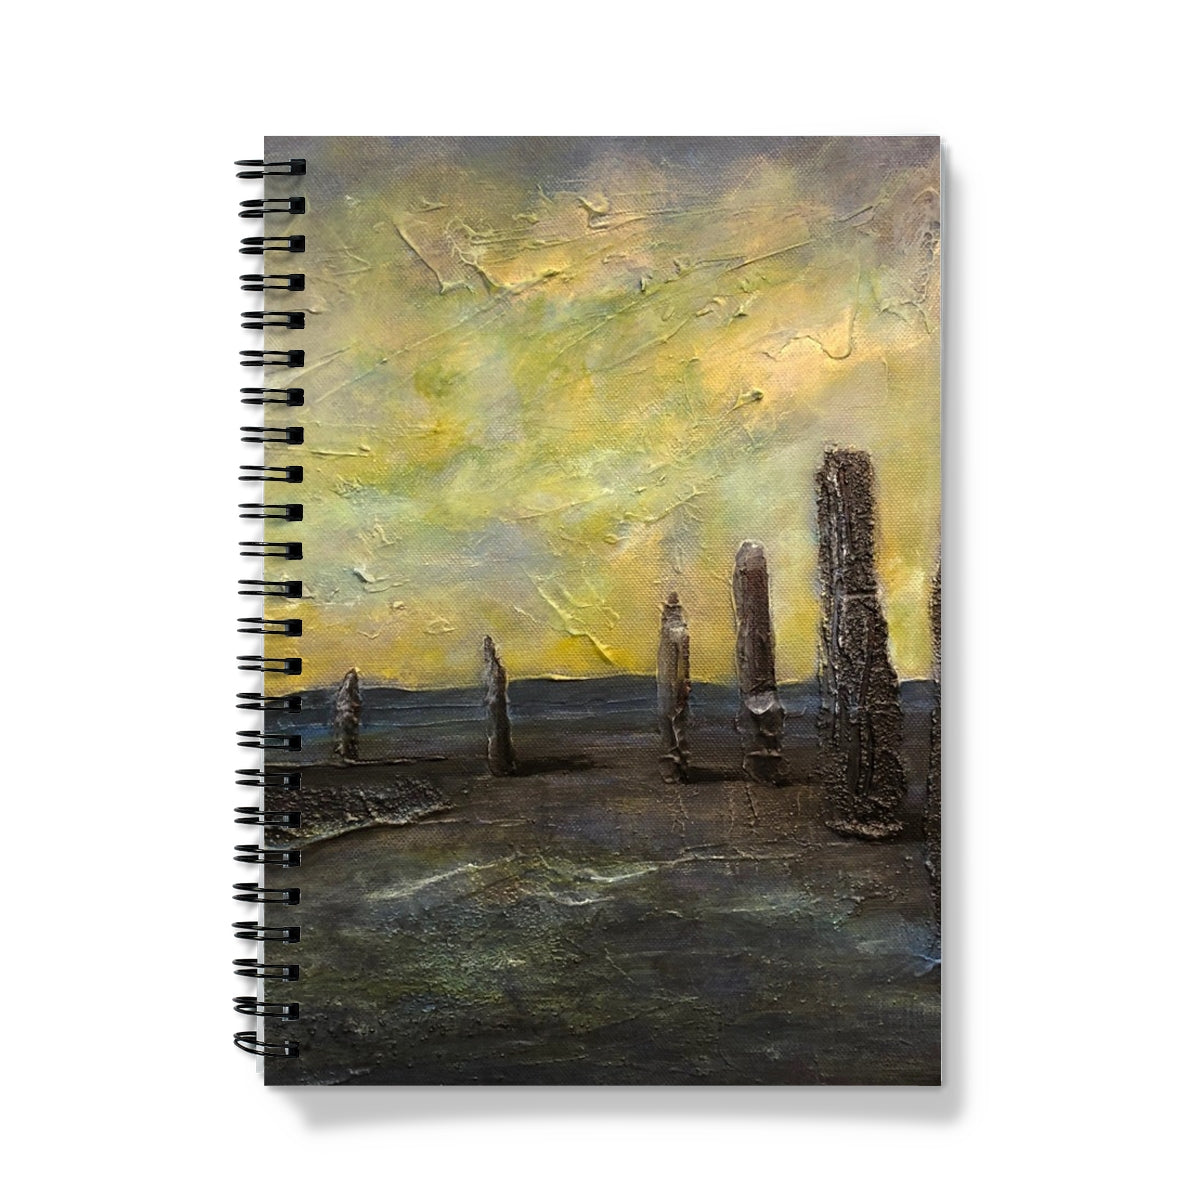 An Ethereal Ring Of Brodgar Art Gifts Notebook-Journals & Notebooks-Orkney Art Gallery-A5-Graph-Paintings, Prints, Homeware, Art Gifts From Scotland By Scottish Artist Kevin Hunter